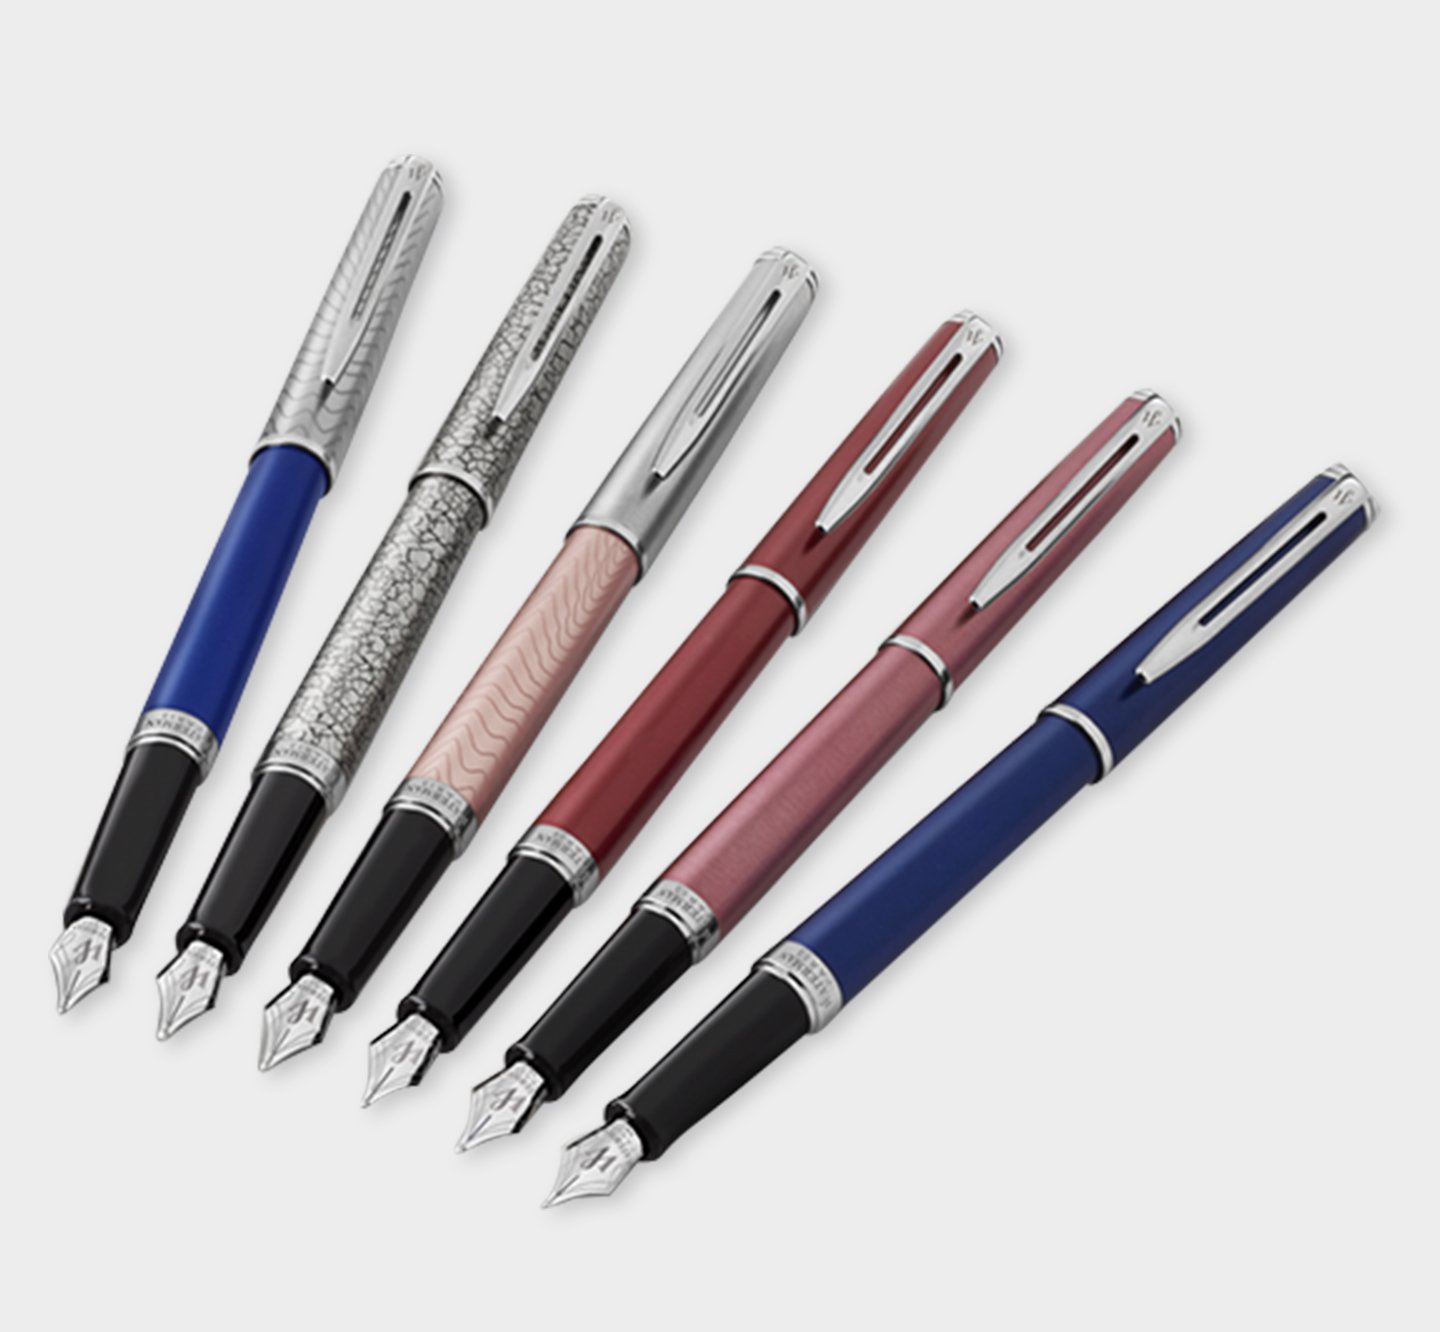 Six Hemisphere fountain pens with chrome trim lined up in a curved formation.